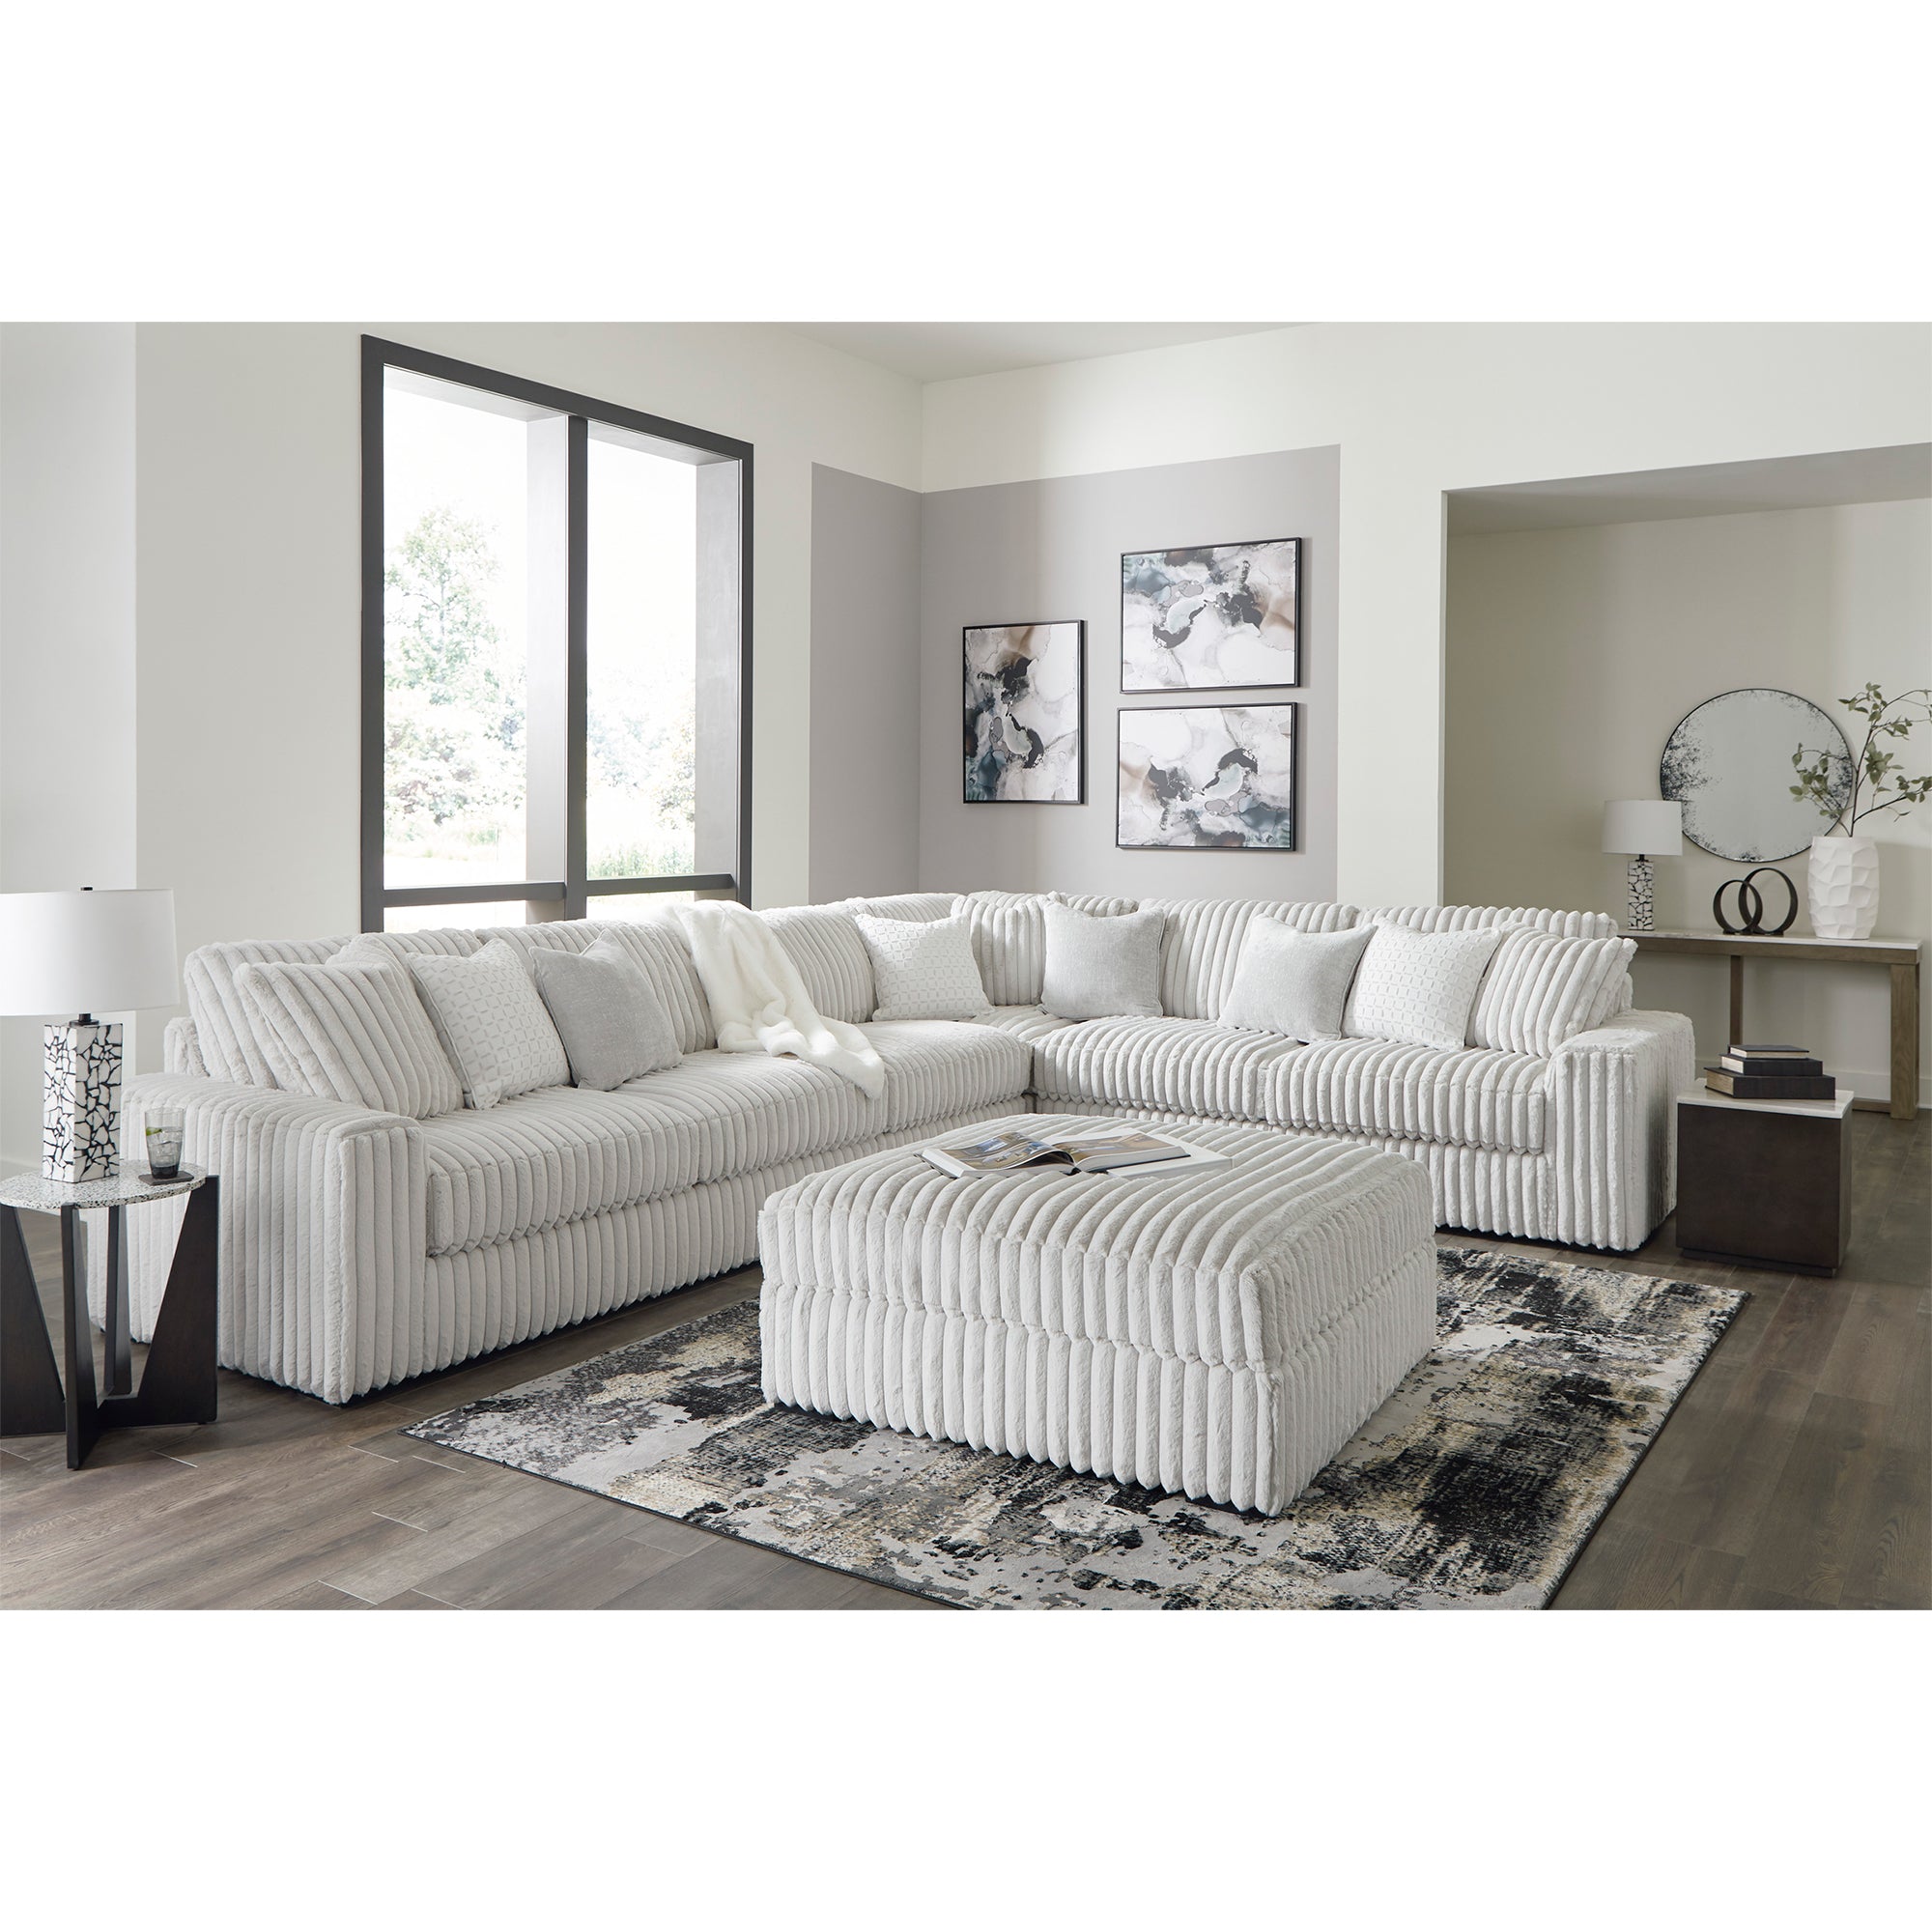 Stupendous 4-Piece Sectional, a blend of everyday relaxation and distinctive design with its soft feather-fiber cushions